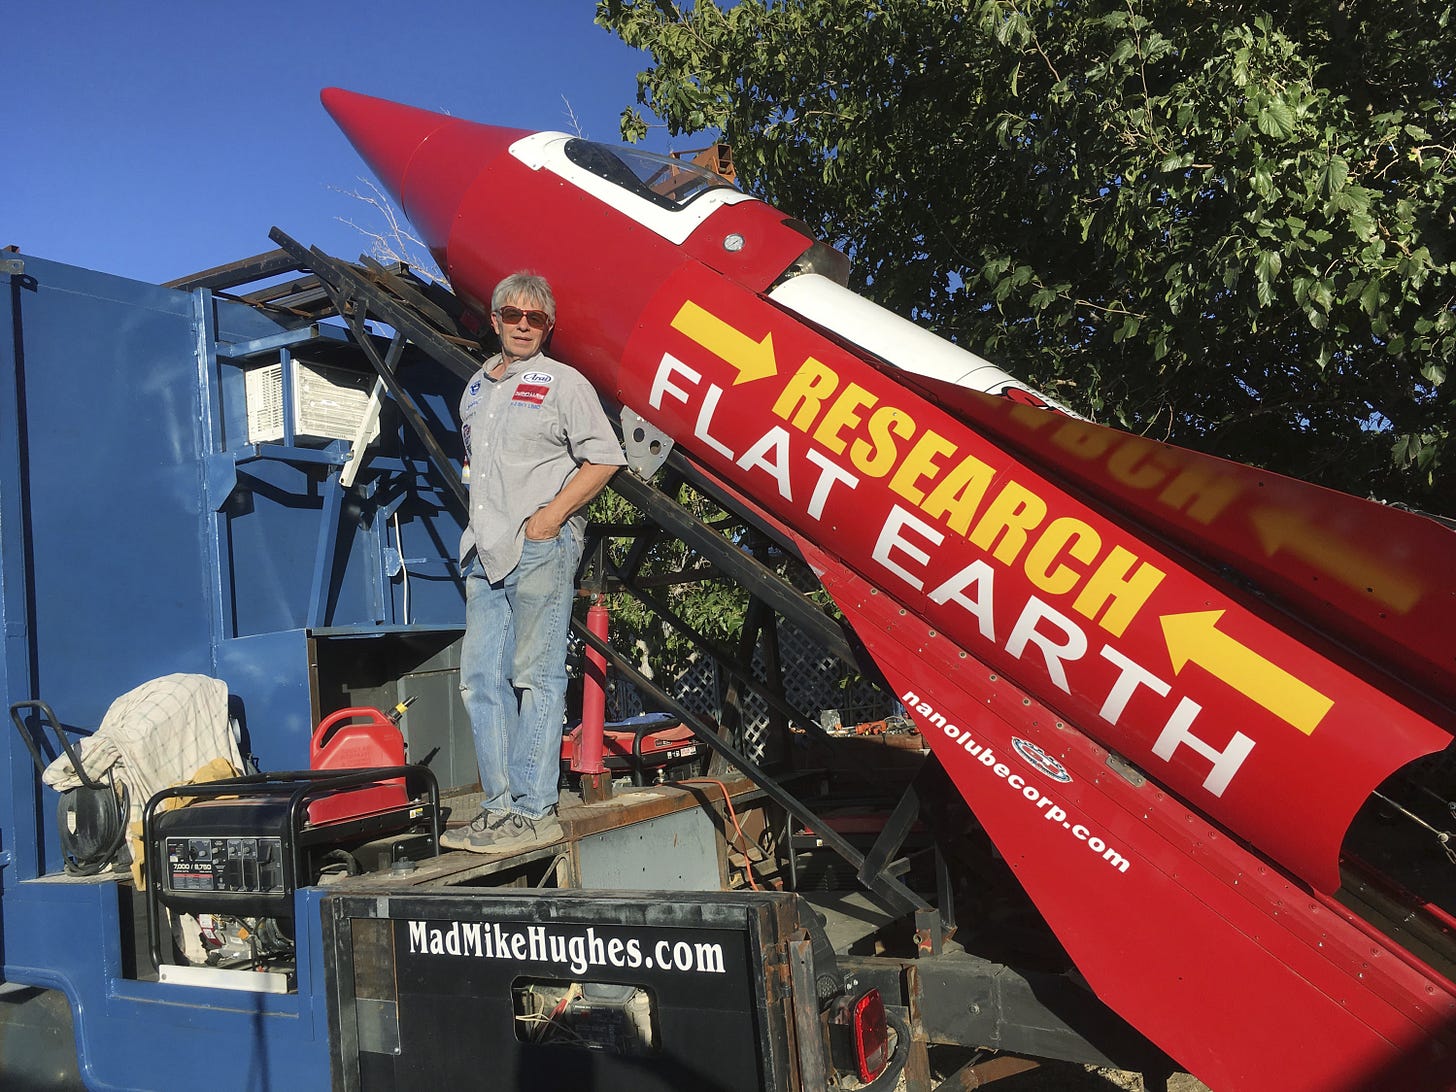 I Don't Believe In Science,' Says Flat-Earther Set To Launch Himself In Own  Rocket : The Two-Way : NPR